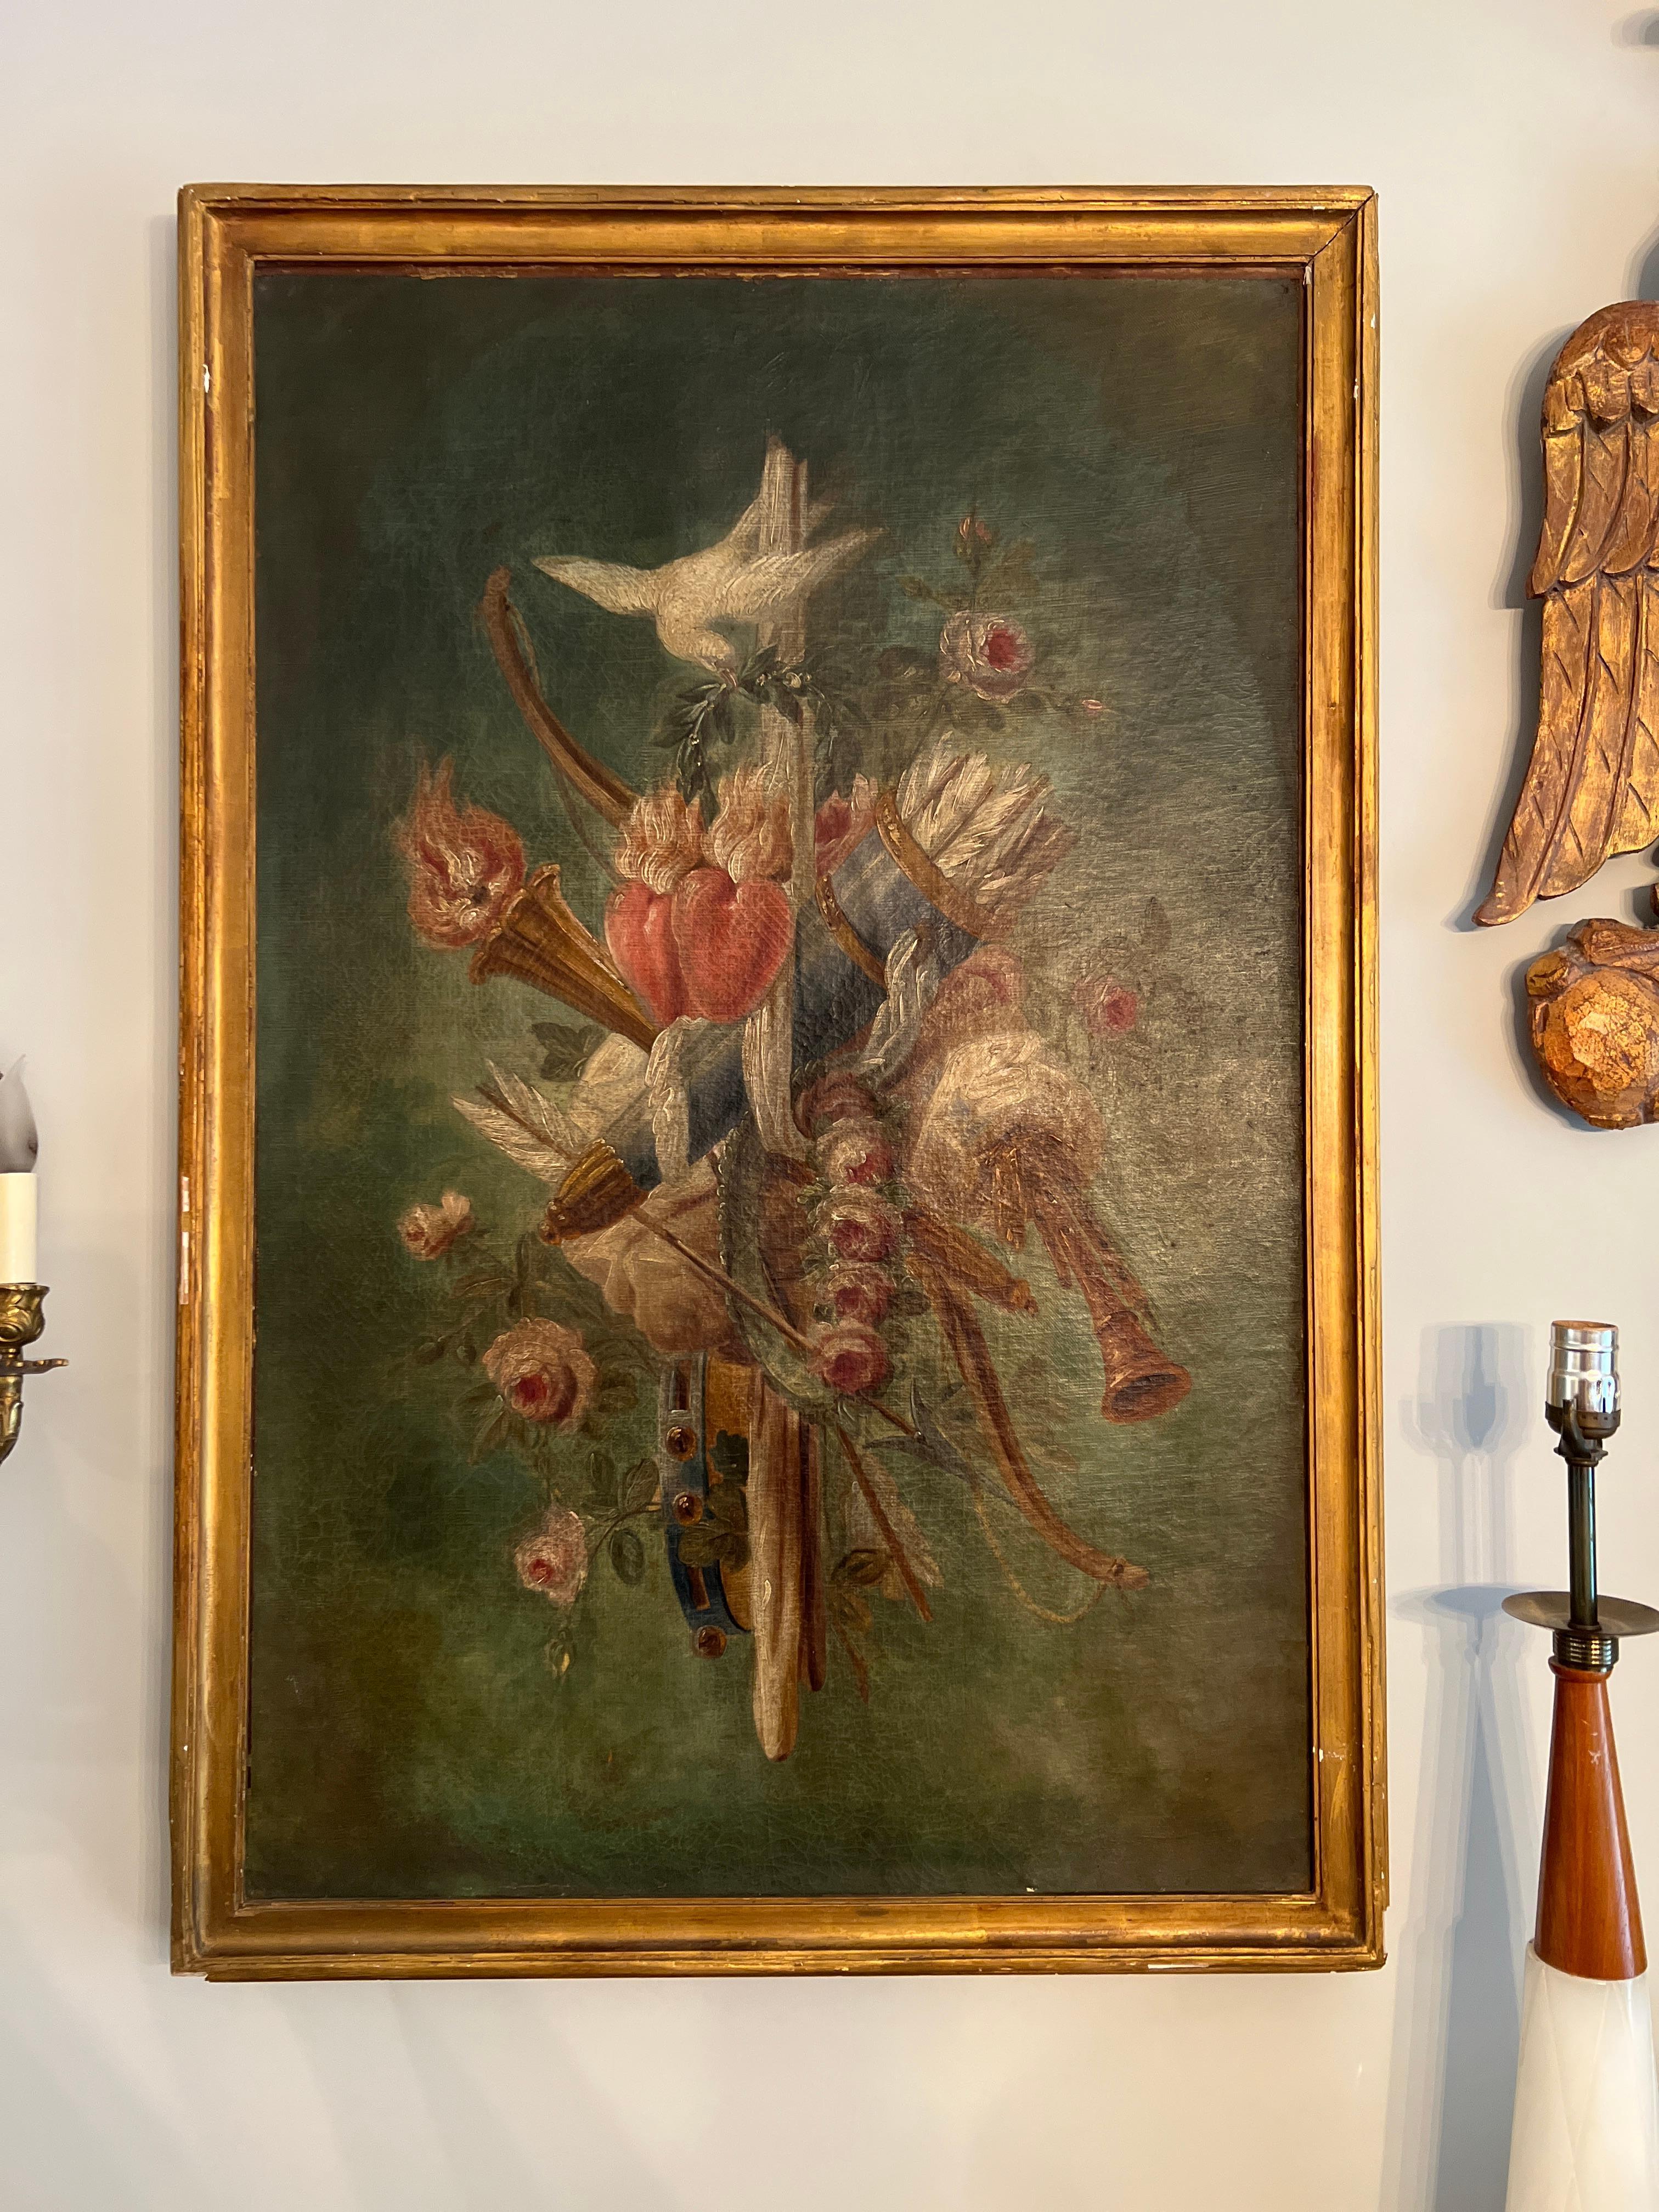 French School, circa 1780.

A phenomenal pair of 18th century French School Nautra Morta paintings on canvas. Each master work depicts a rich tapestry of romantic imagery including doves, a quiver, roses, torches, musical instruments and more.